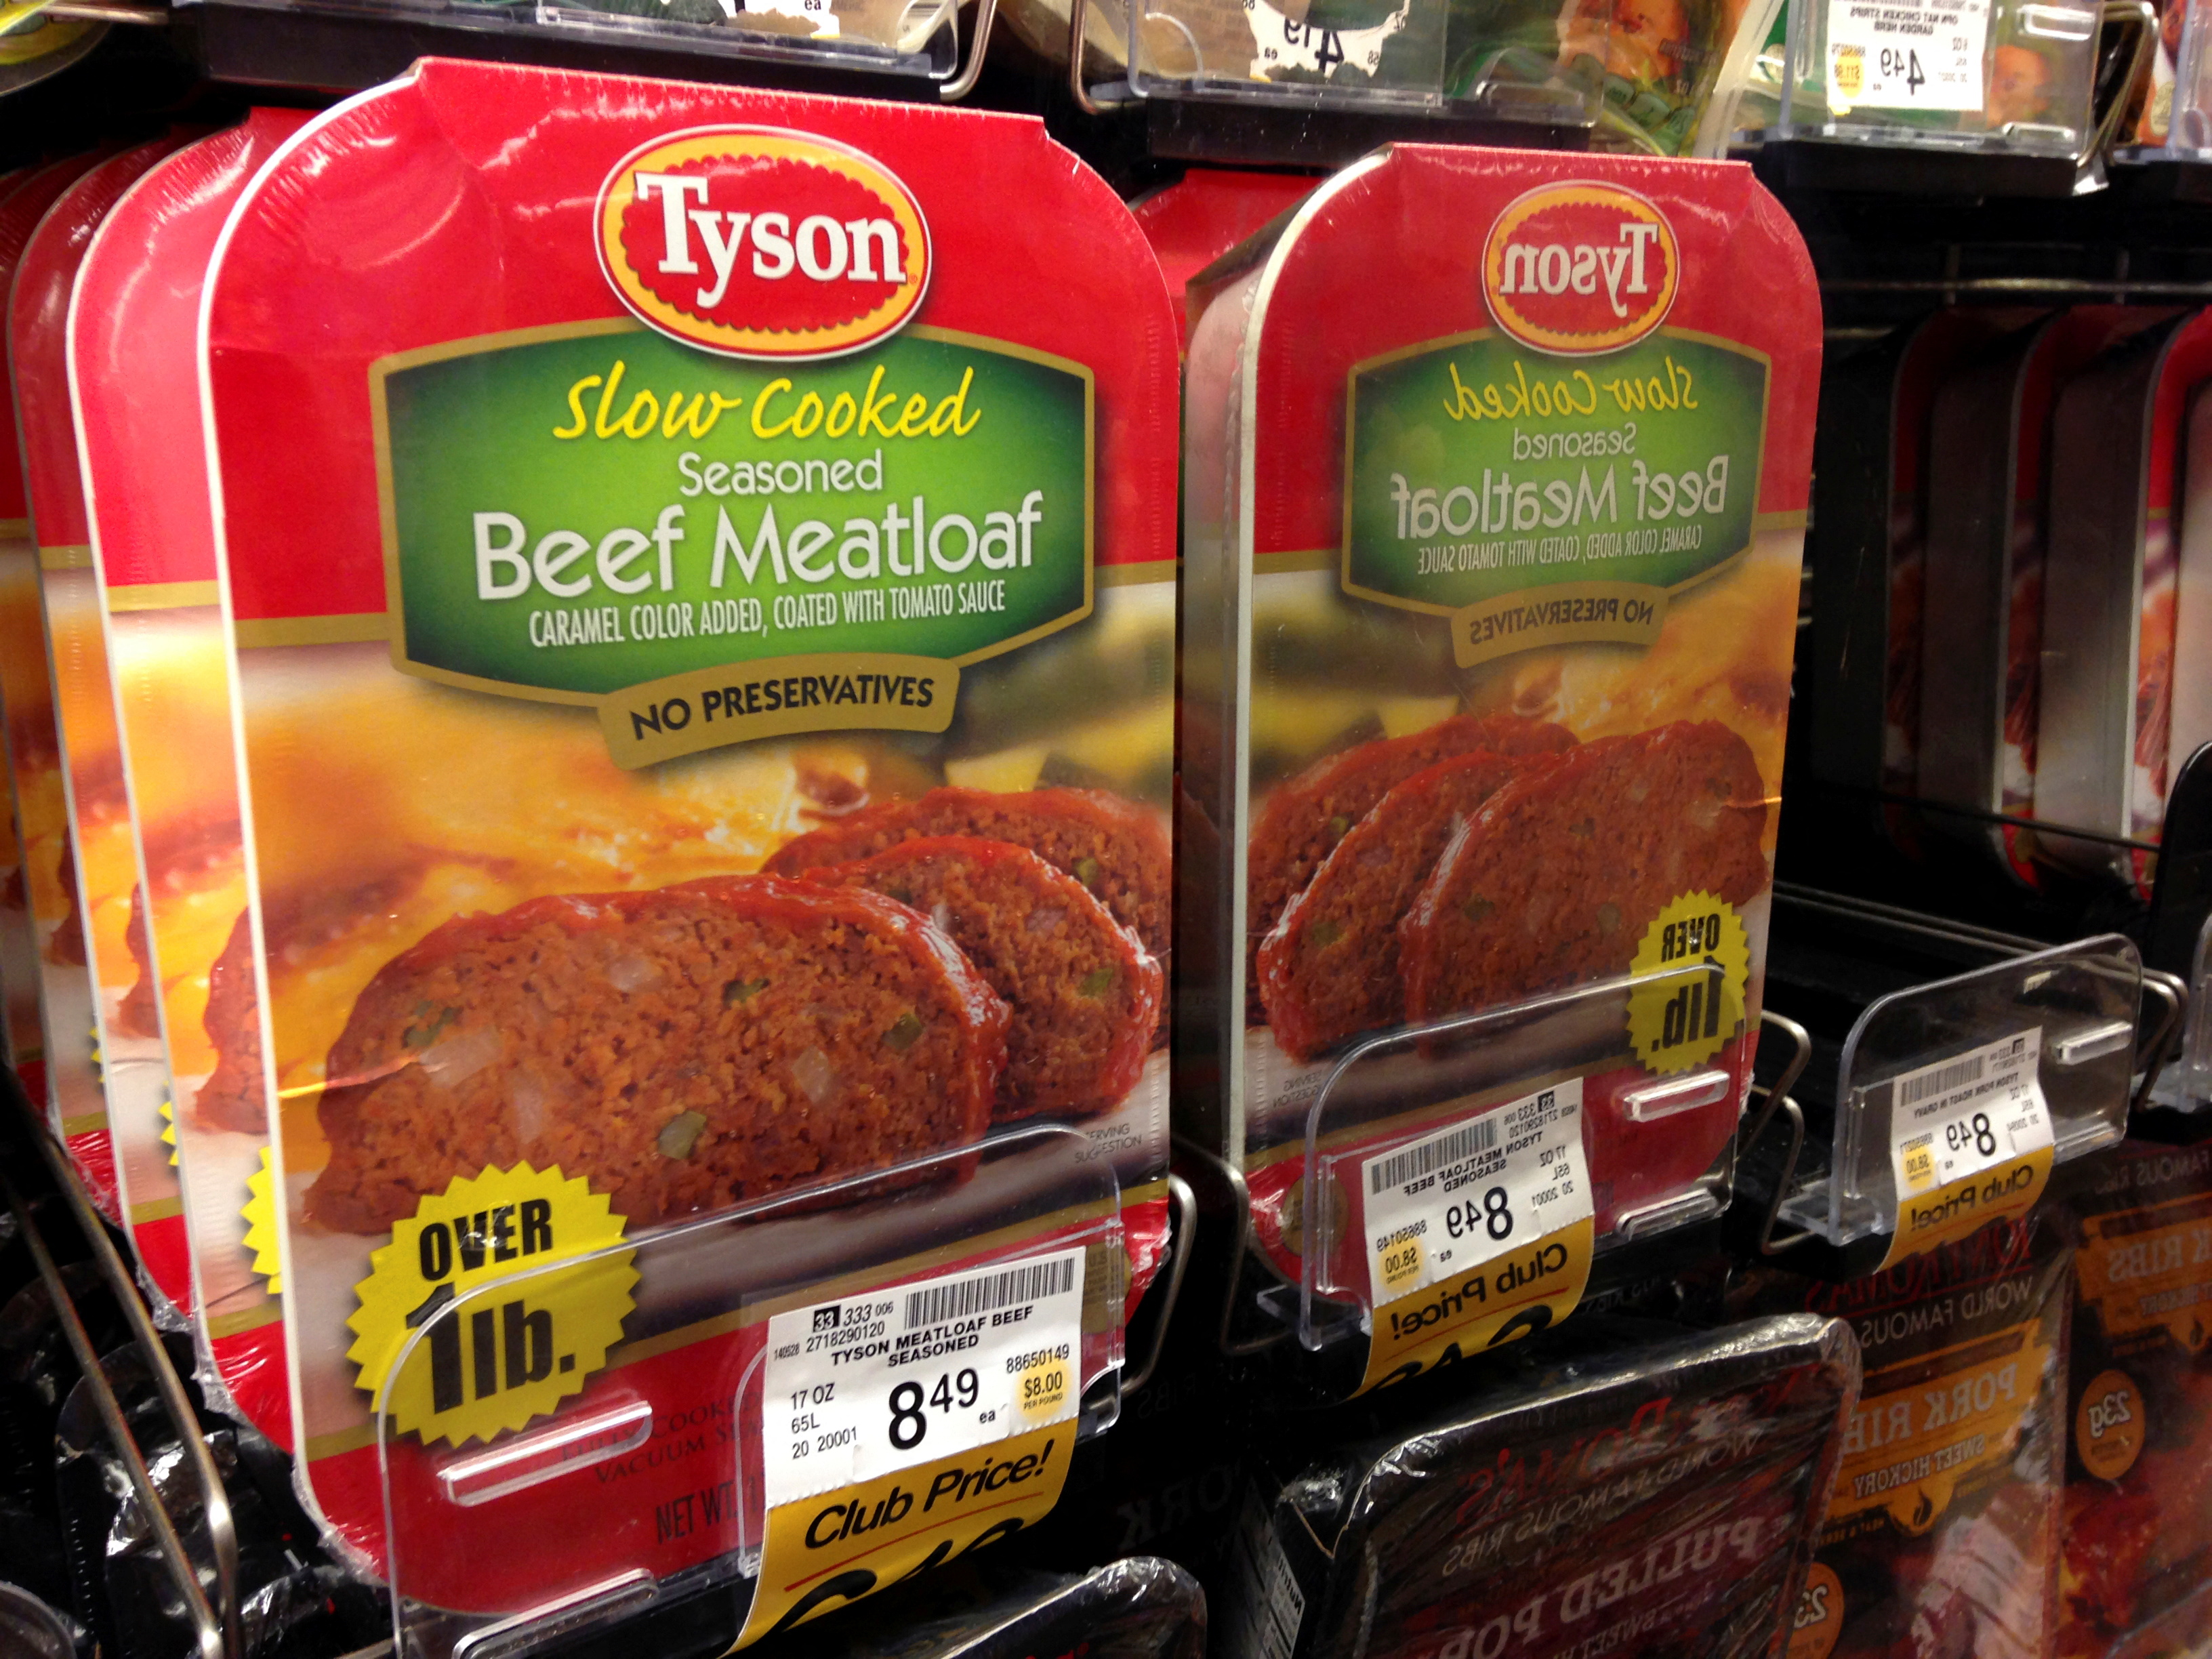 Packages of Tyson food beef meat loaf are reflected in a mirror as they sit on a refrigerator shelf for sale at a grocery store in Encinitas, California, United States